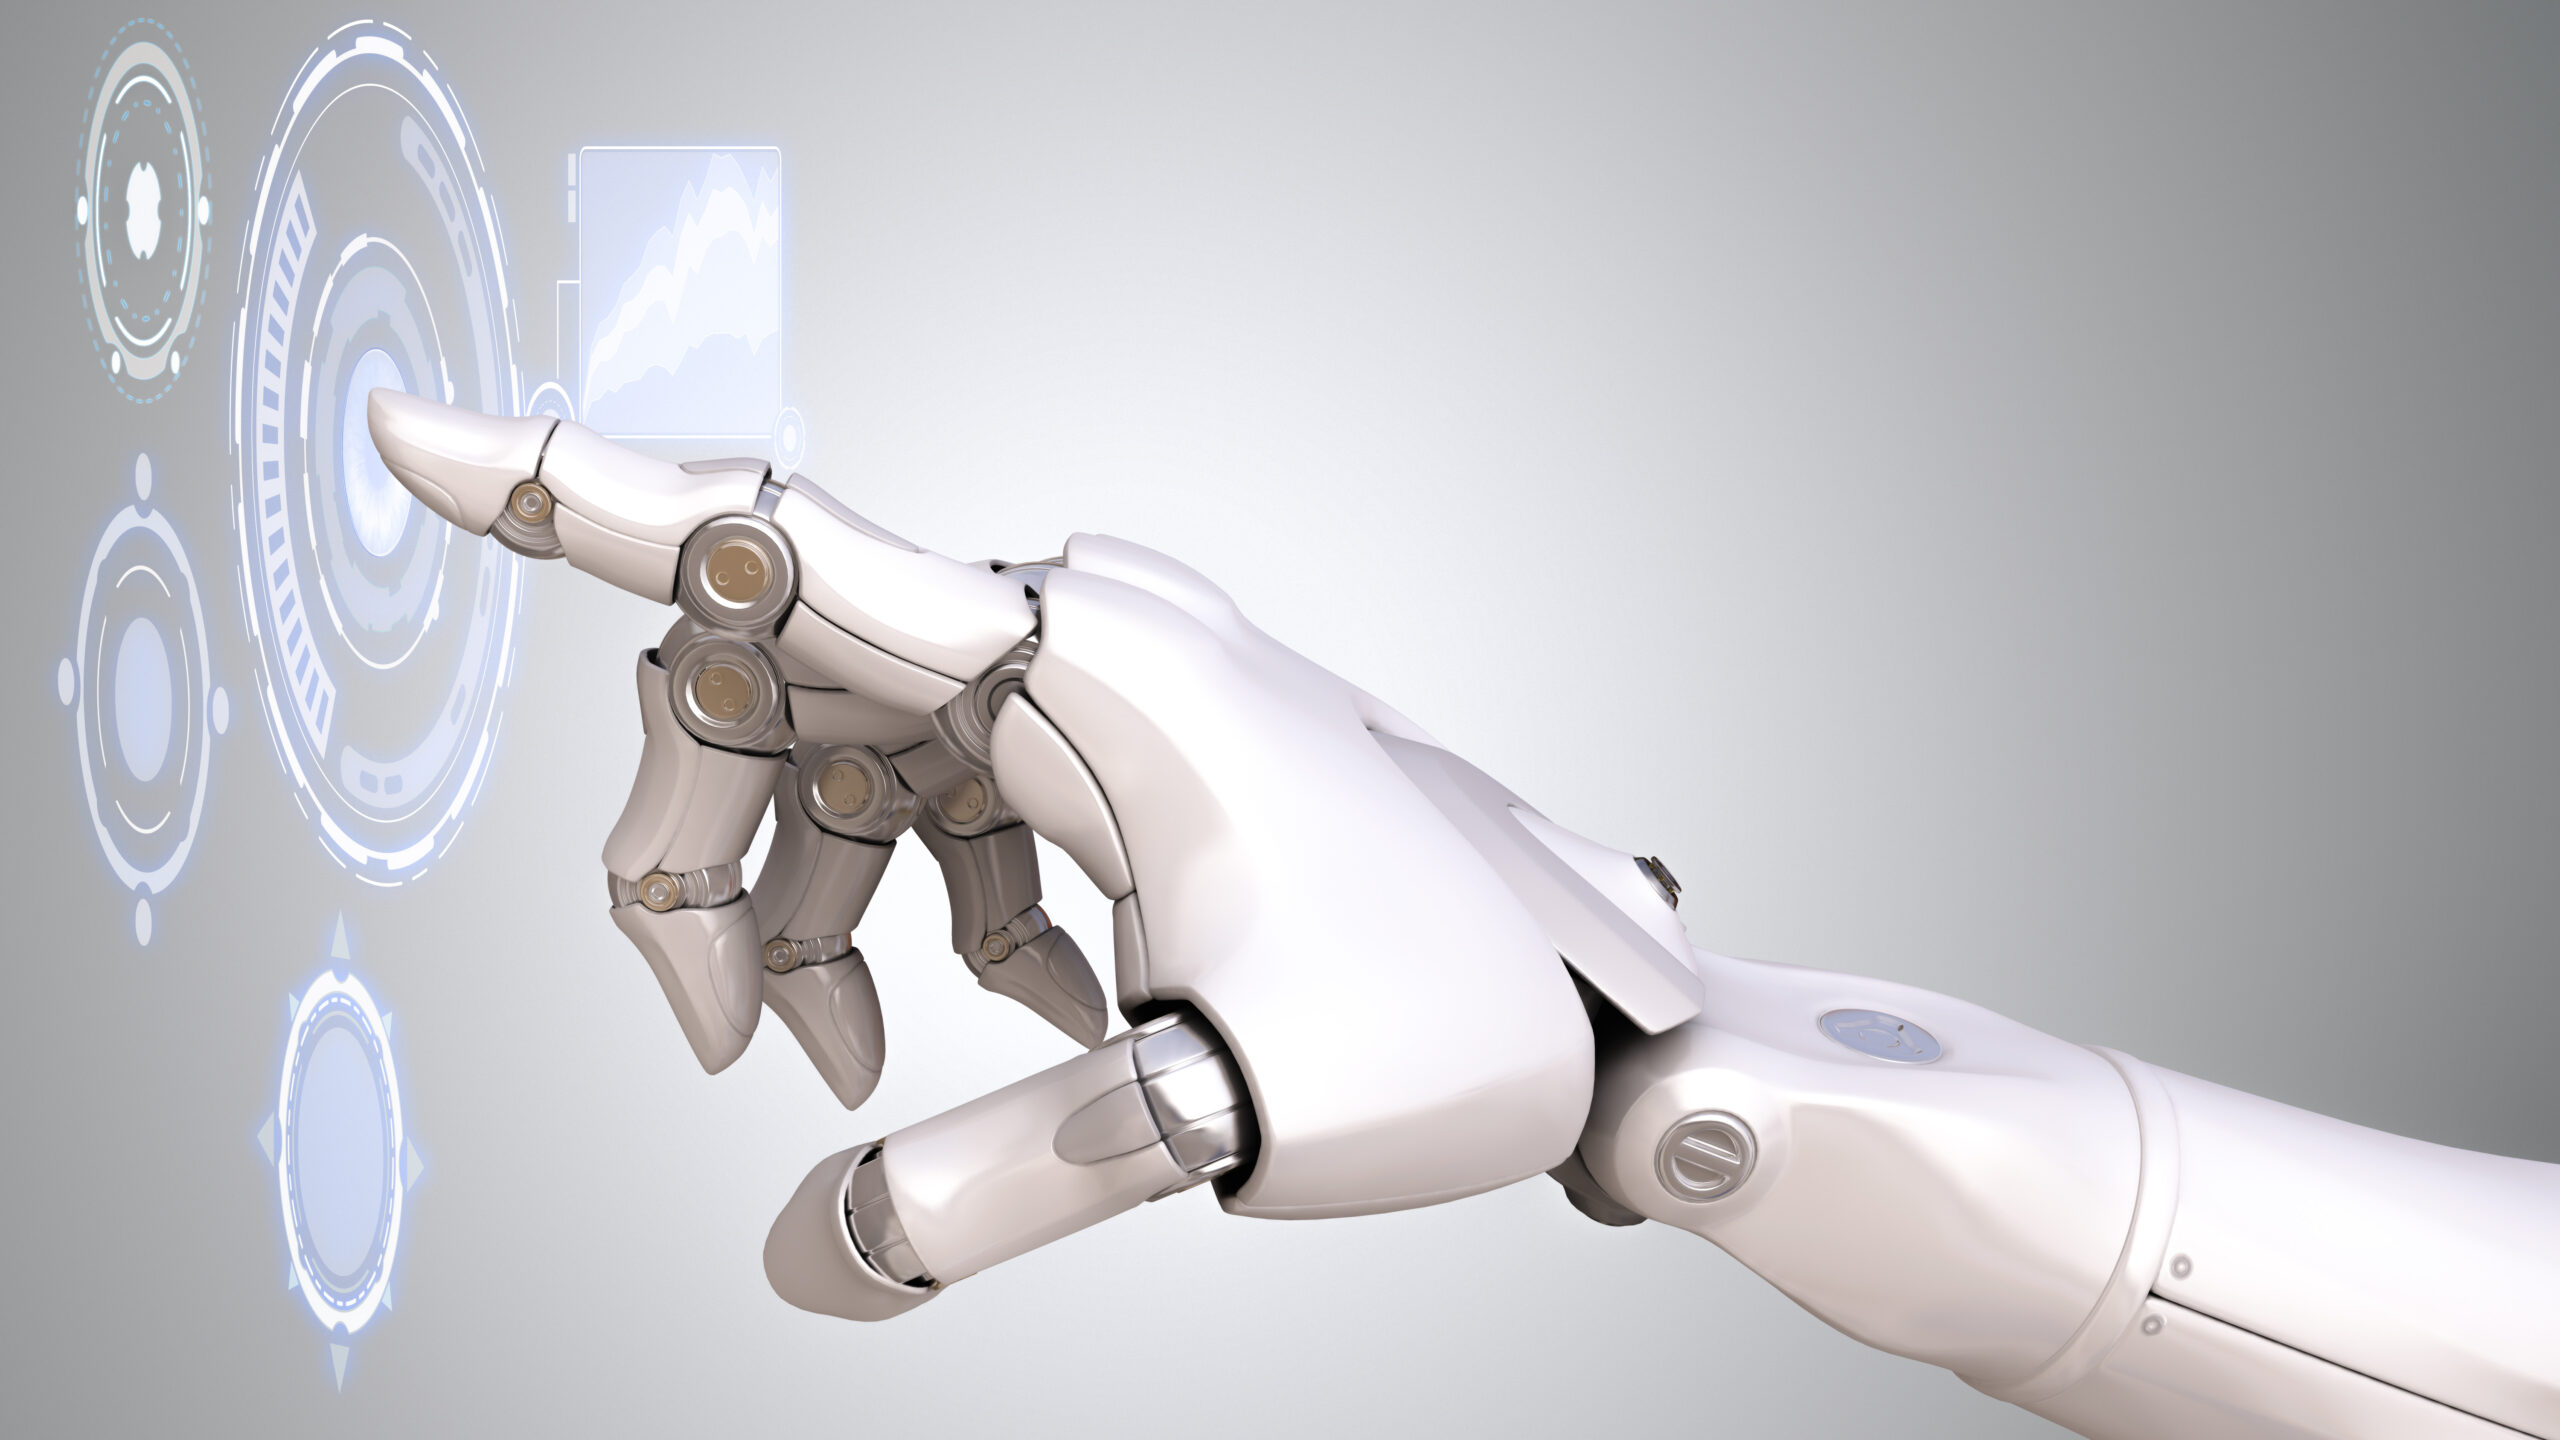 Robot's arm working with Virtual Reality touchscreen. 3D illustration